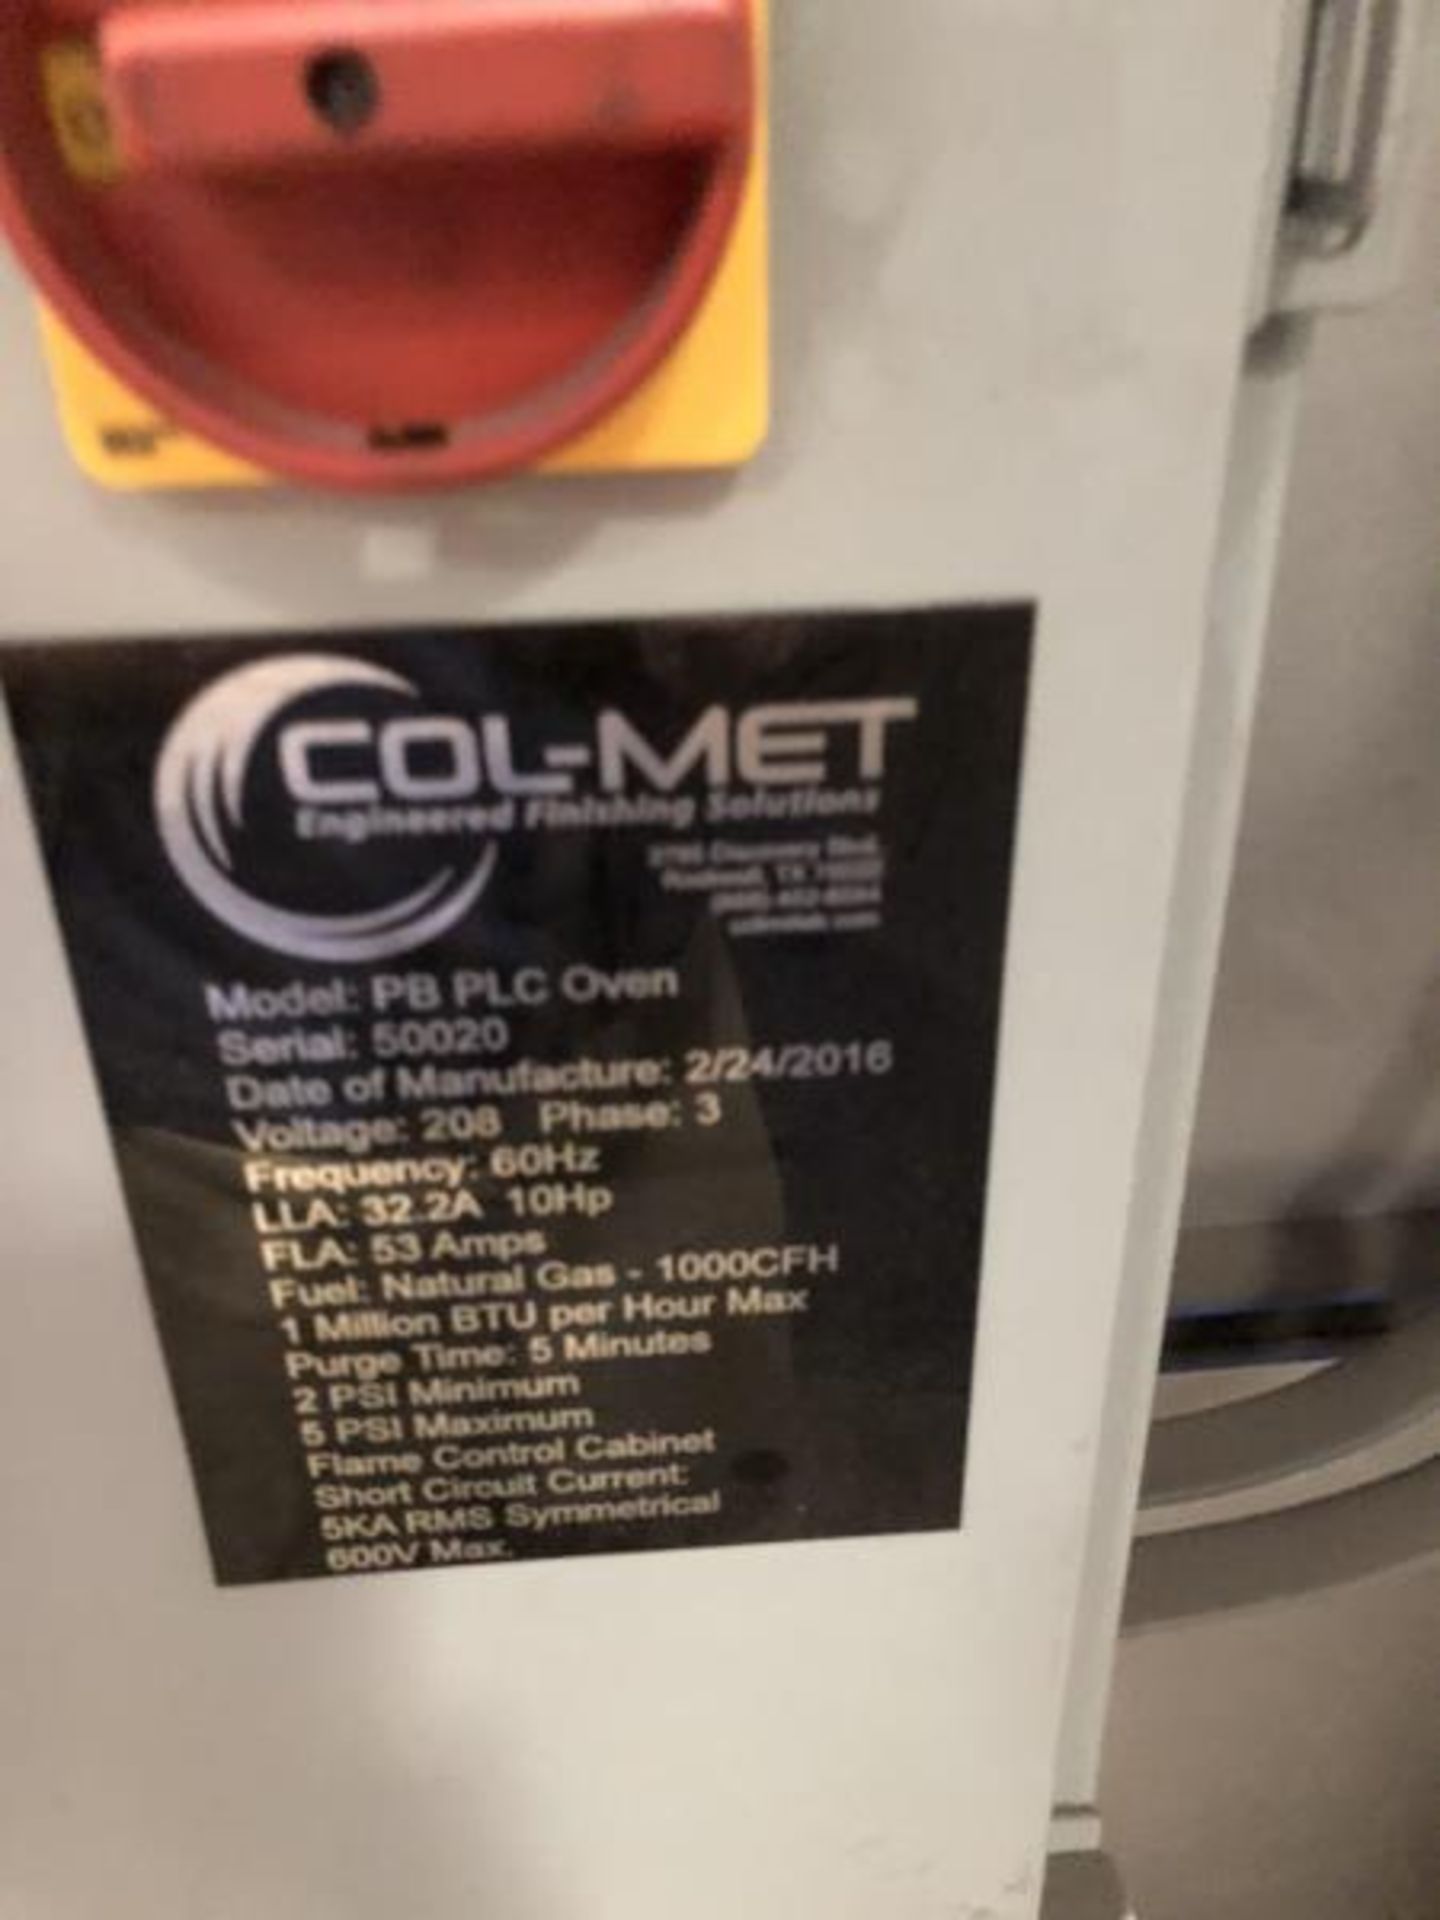 Colmet Oven, made 2/24/2016, M: 212412016, 208 Volts, 3 Phase, LLA: 32.2A/10 HP, FLA: 53AMPS, Fuel - Image 16 of 20